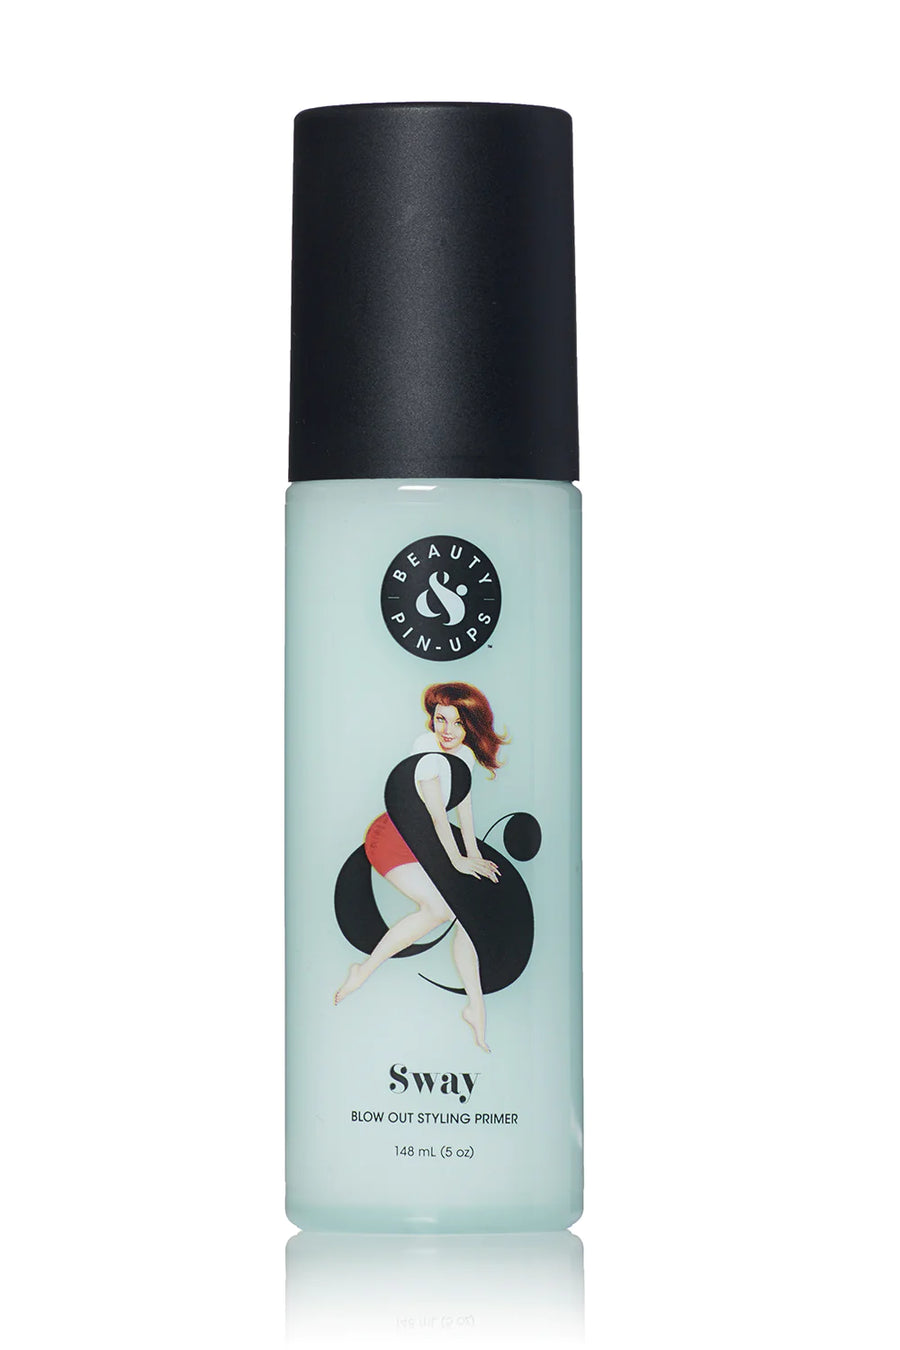 Beauty & Pin Ups Sway Blow Out Styling Primer image of 5 oz bottle